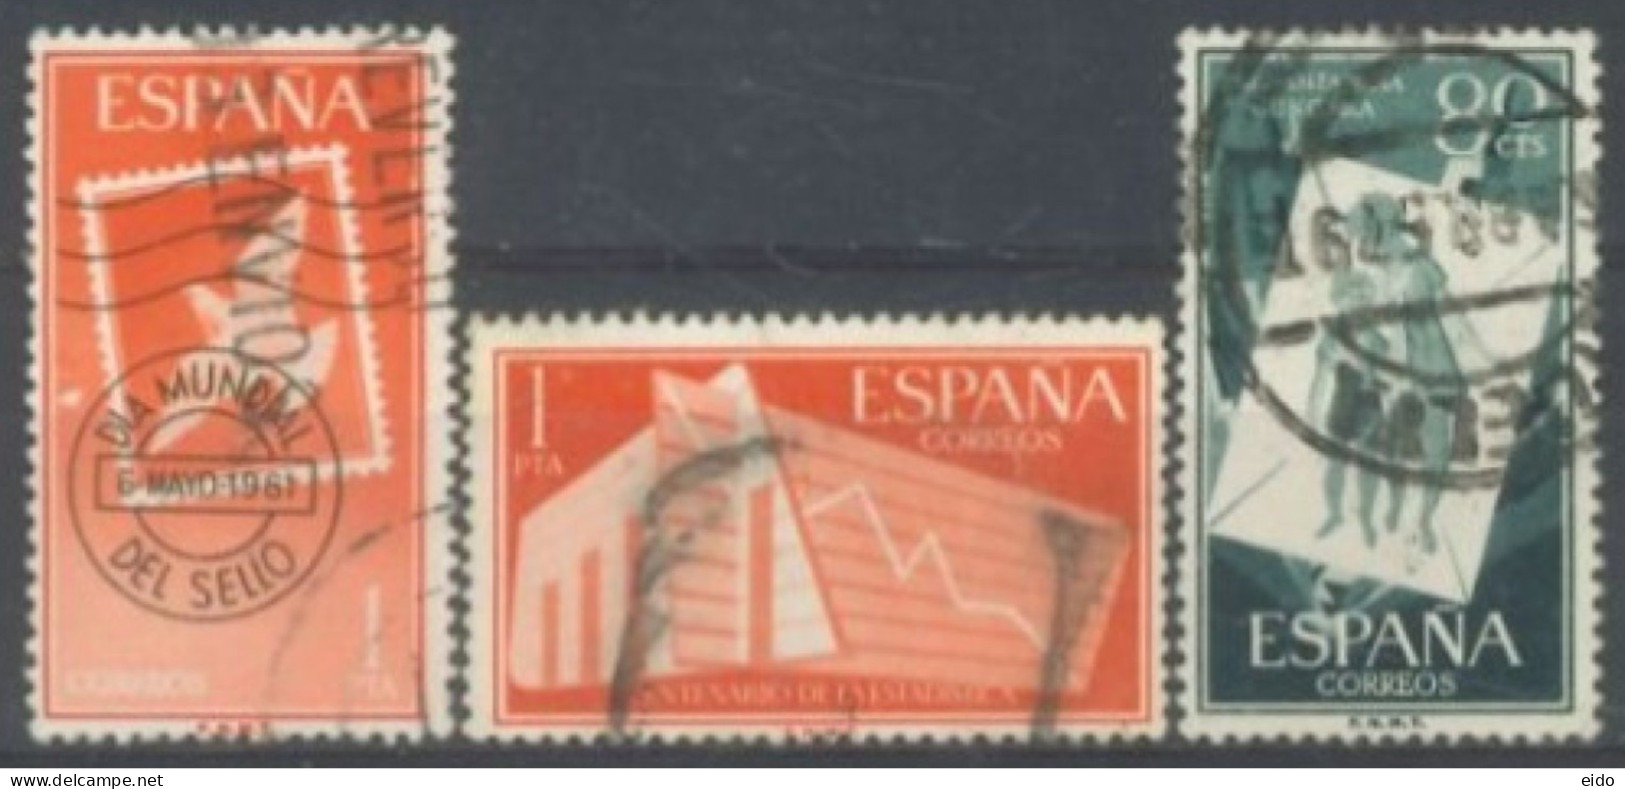 SPAIN, 1956/61, HUNGARIAN CHILDREN, CANCELED STAMP & STATISTICAL SET OF 3, # 855,860, & 988, USED. - Usati